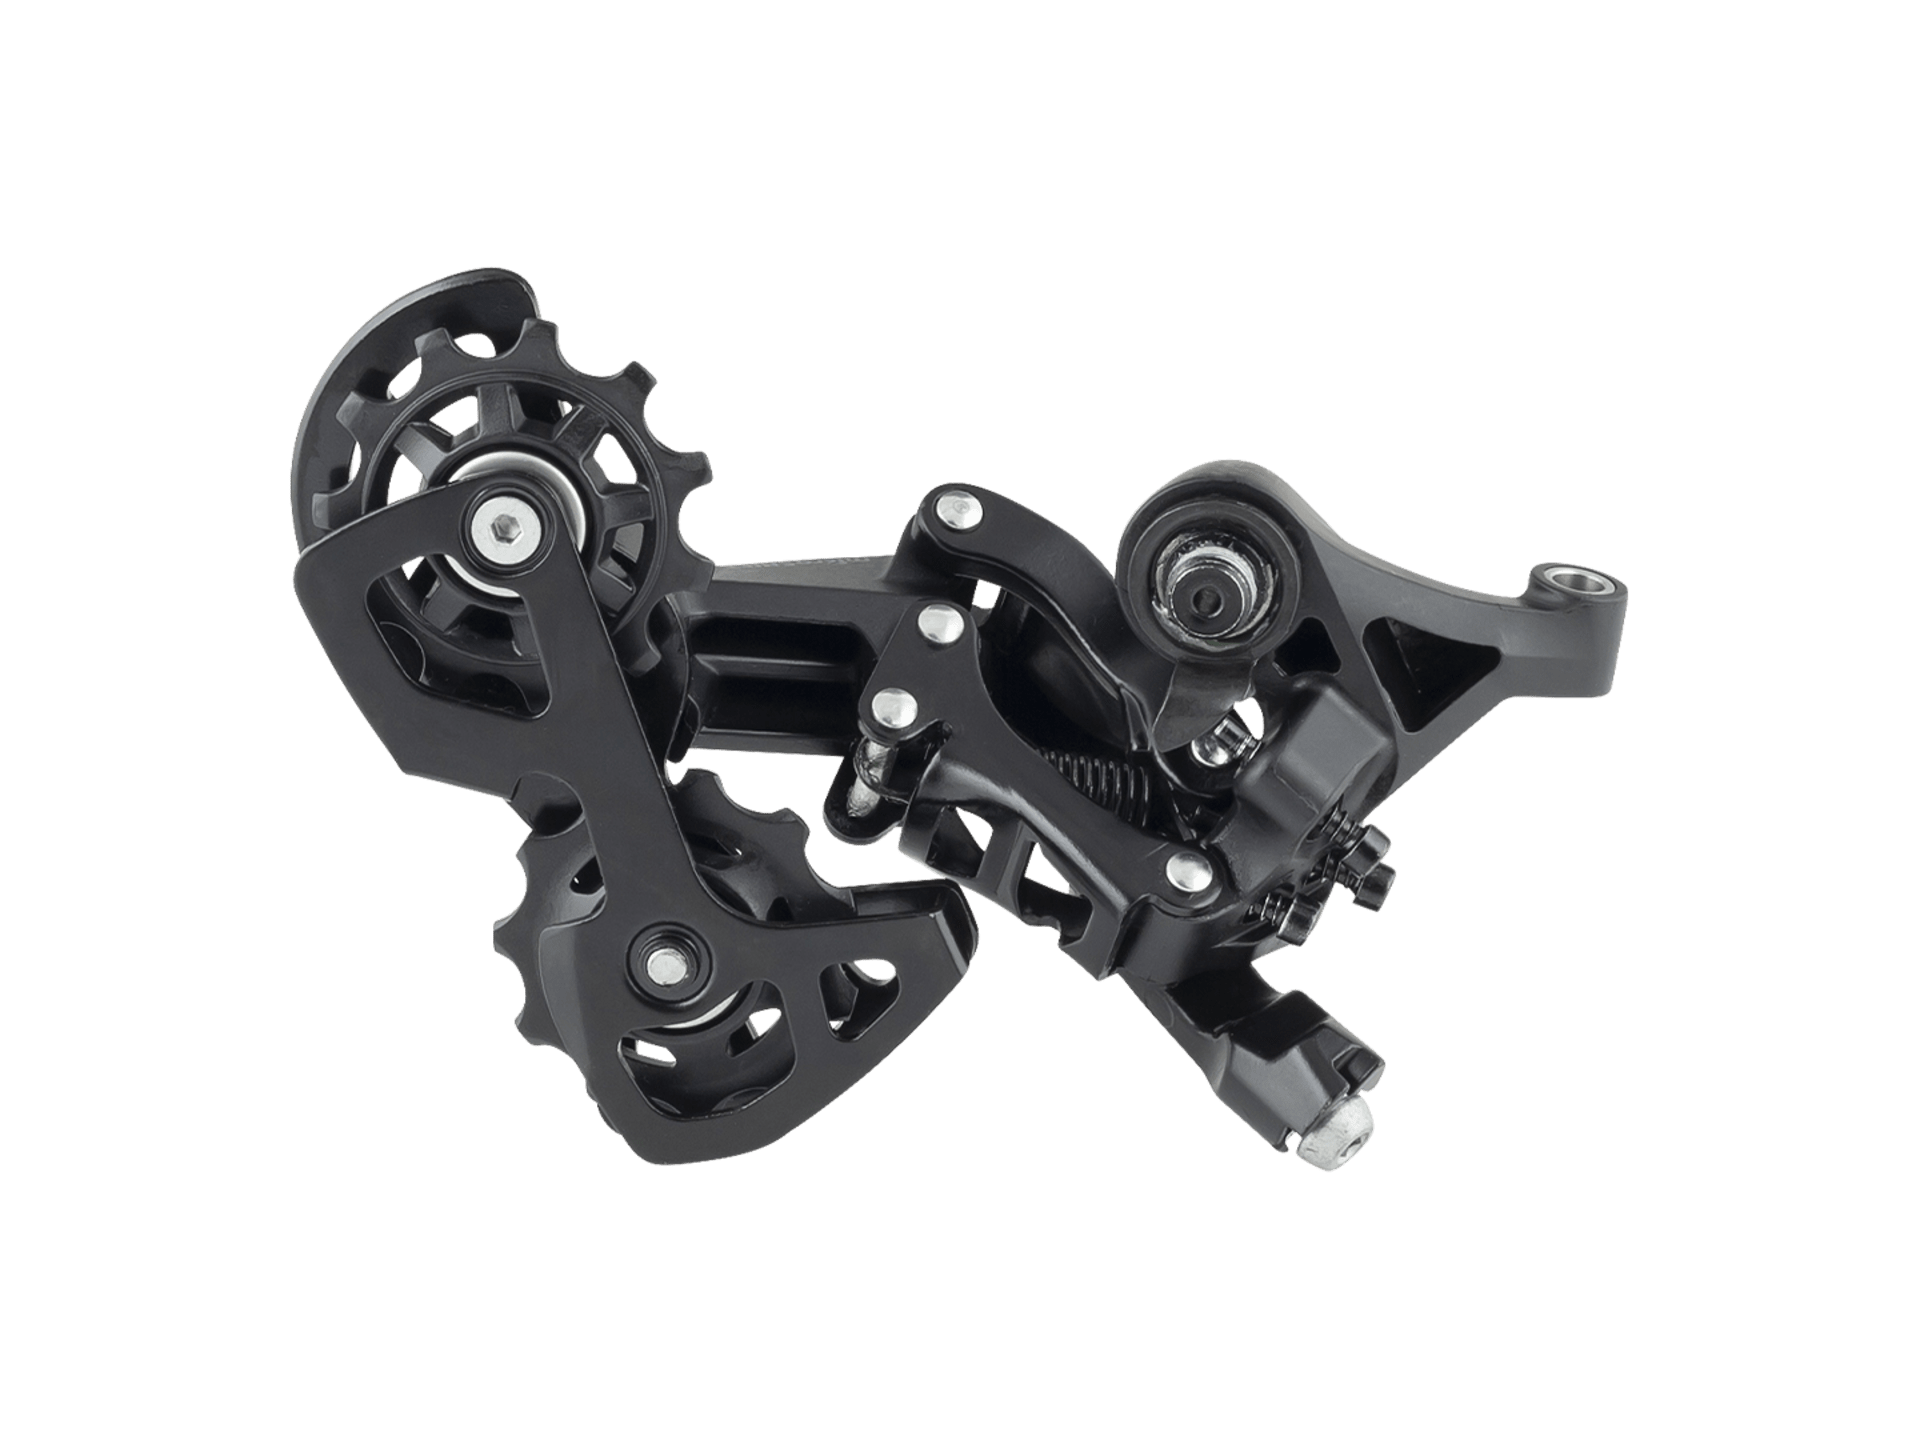 microSHIFT Acolyte Speed Super Short Cage RD-M5180S  8-Speed Rear Derailleur